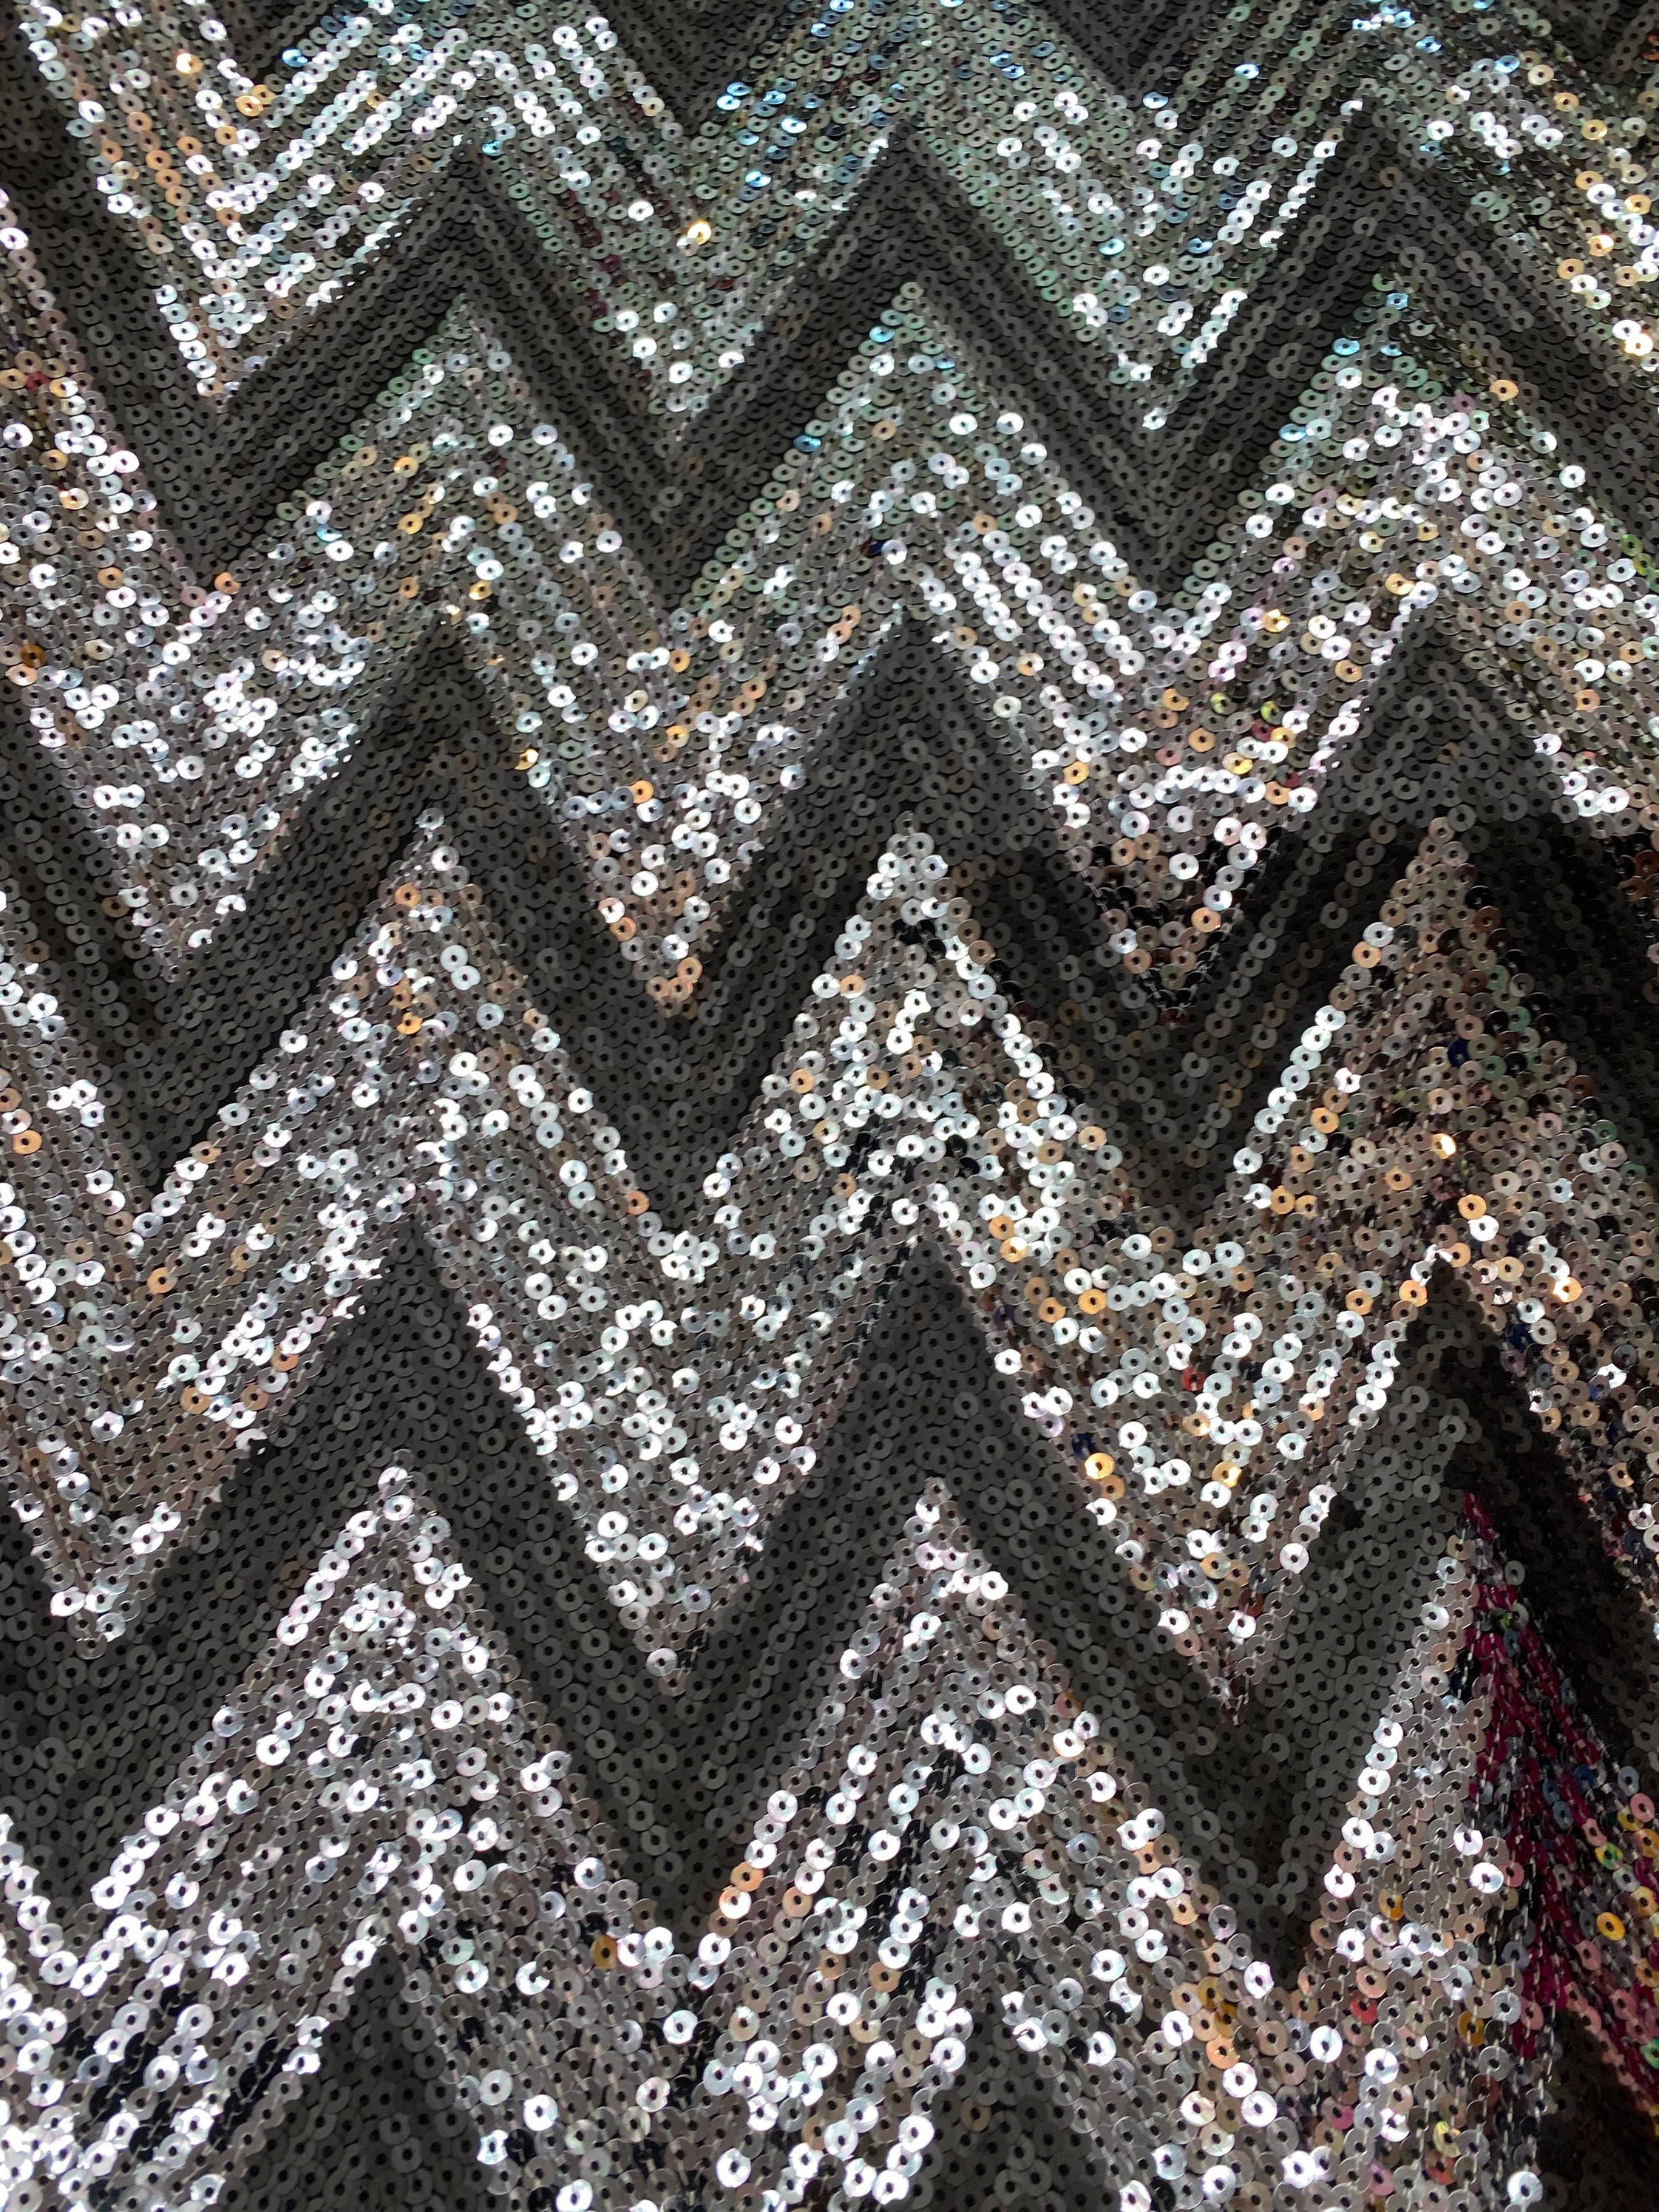 New chevron design embroidered sequins on Lycra base 2-way | Etsy